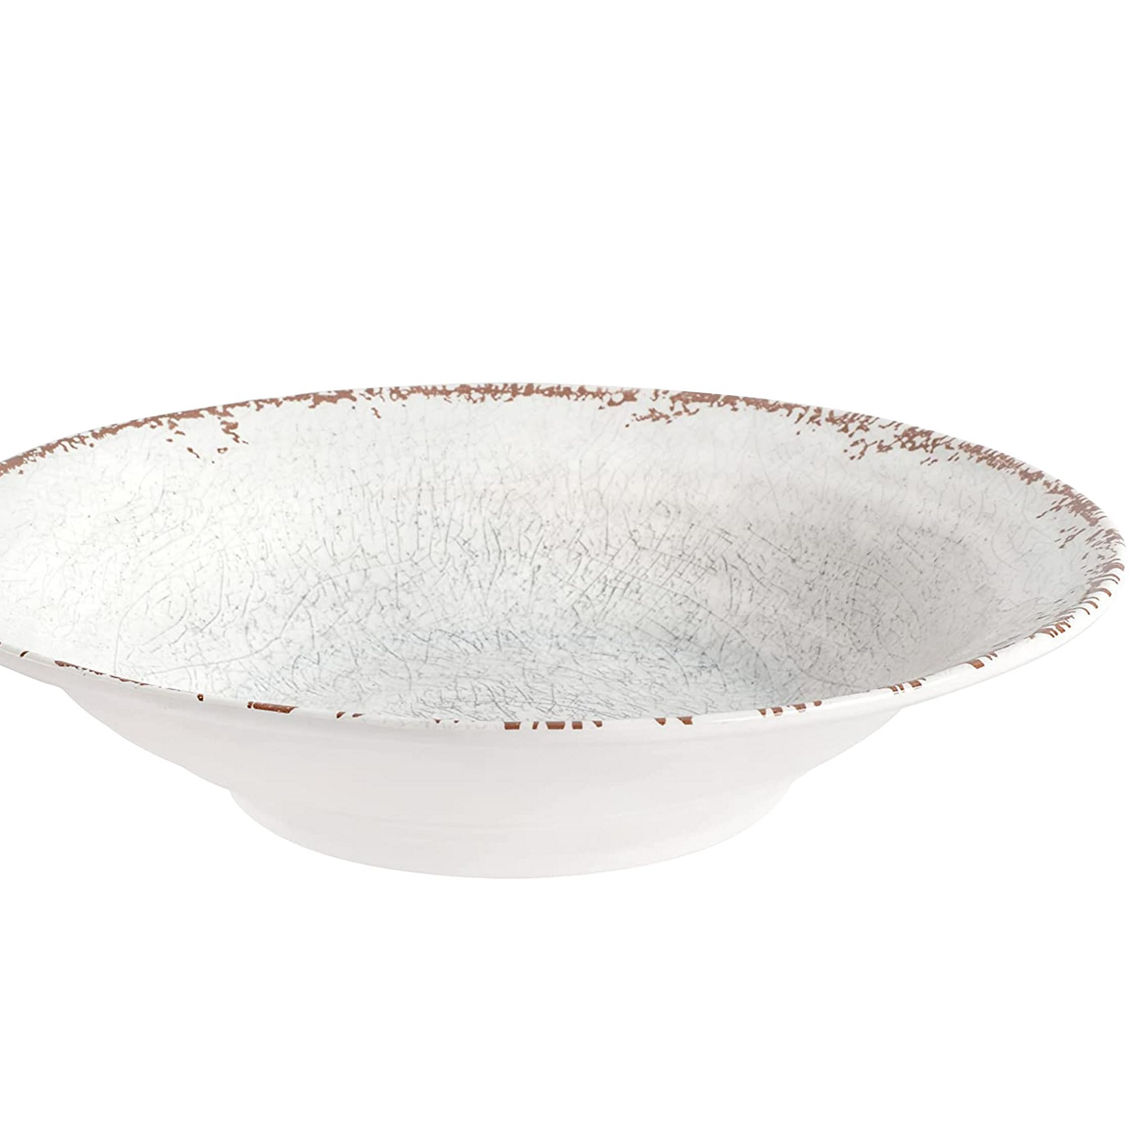 Laurie Gates Mauna 3 Piece Melamine Serving Bowl Set in White with Serving Utens - Image 4 of 5